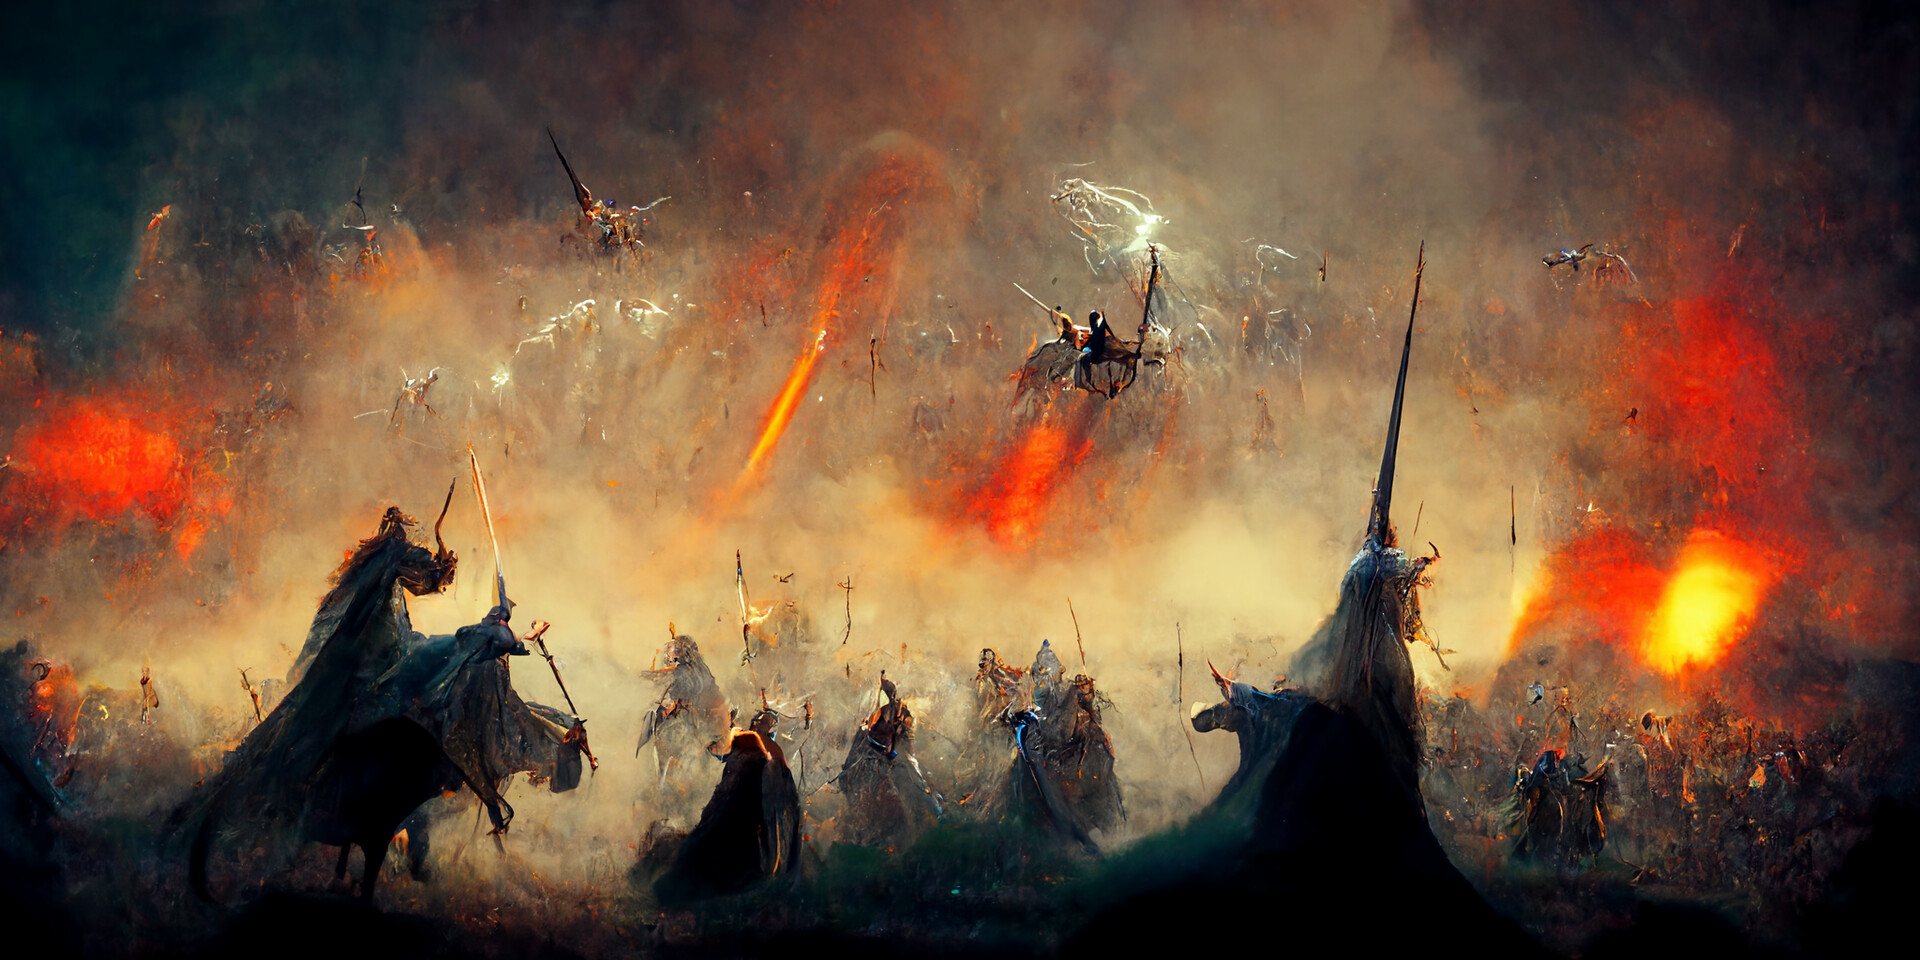 Small Details Fans Noticed About 'Lord of the Rings' Battle Scenes